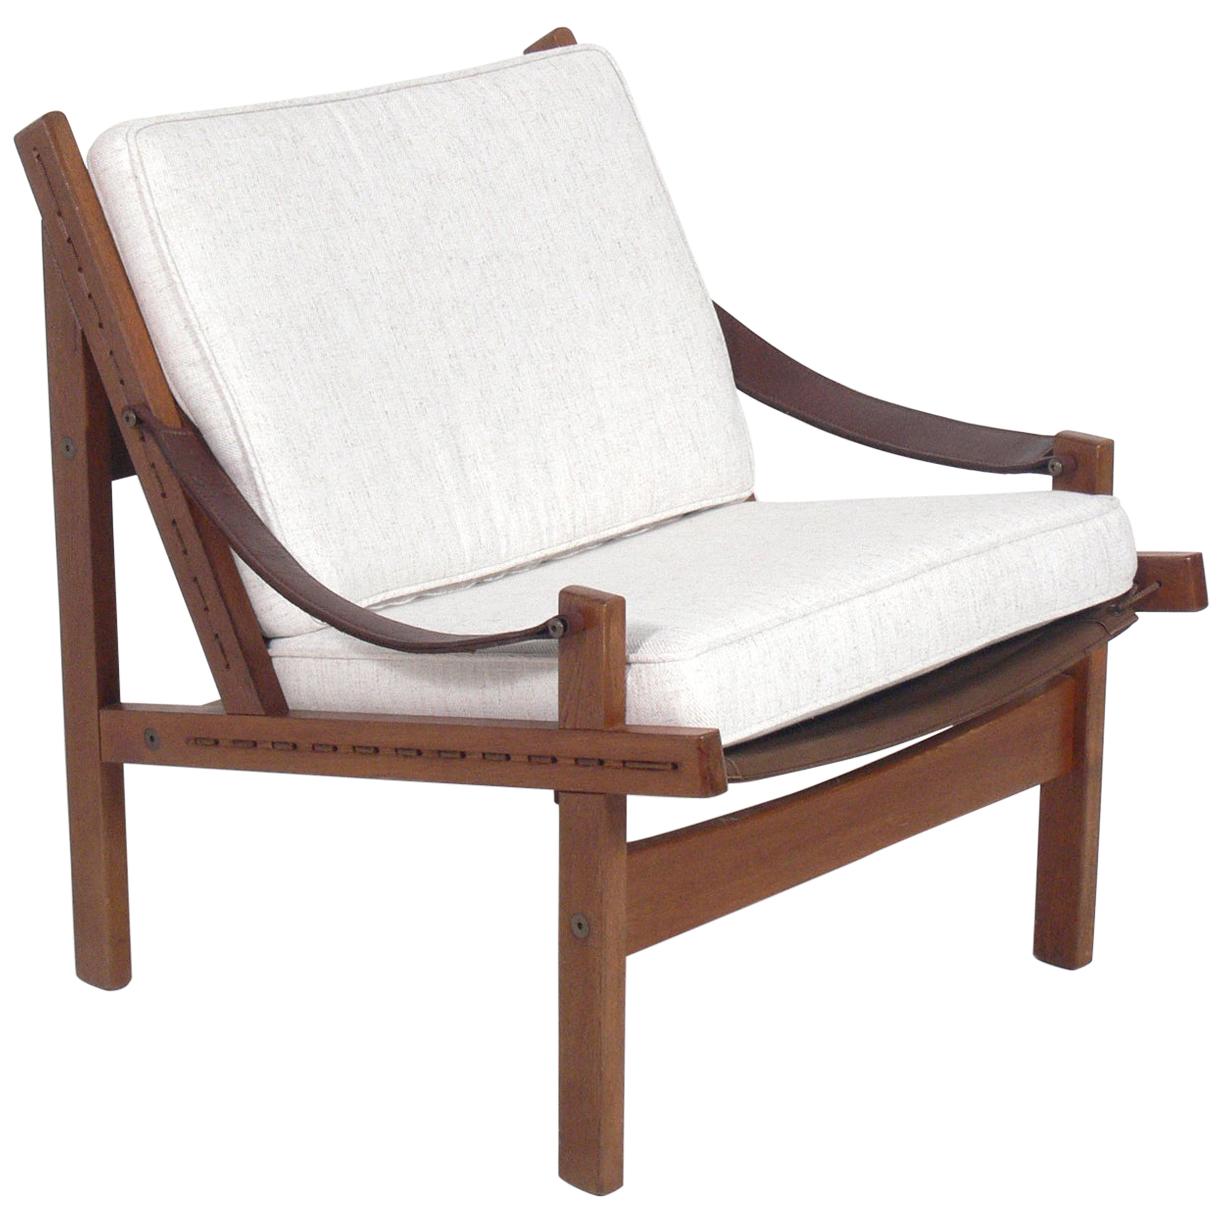 Danish Modern Chair with Leather Strap Arms